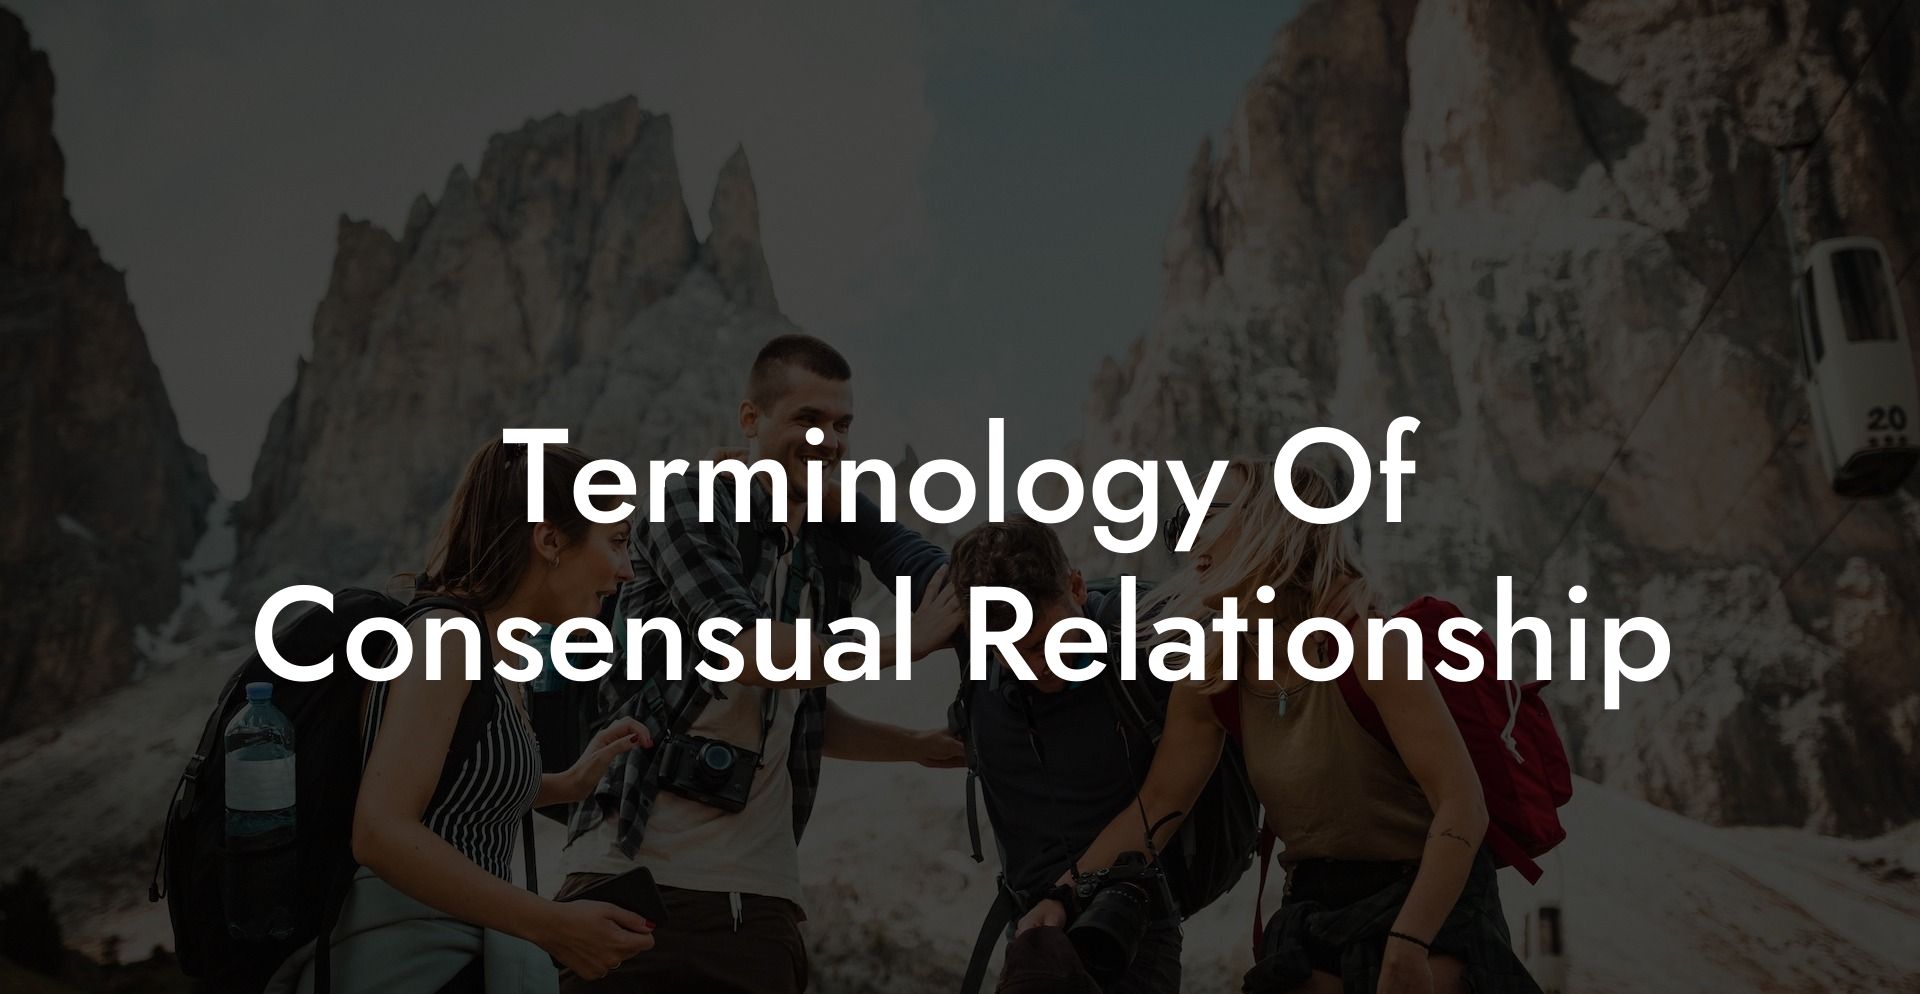 Terminology Of Consensual Relationship